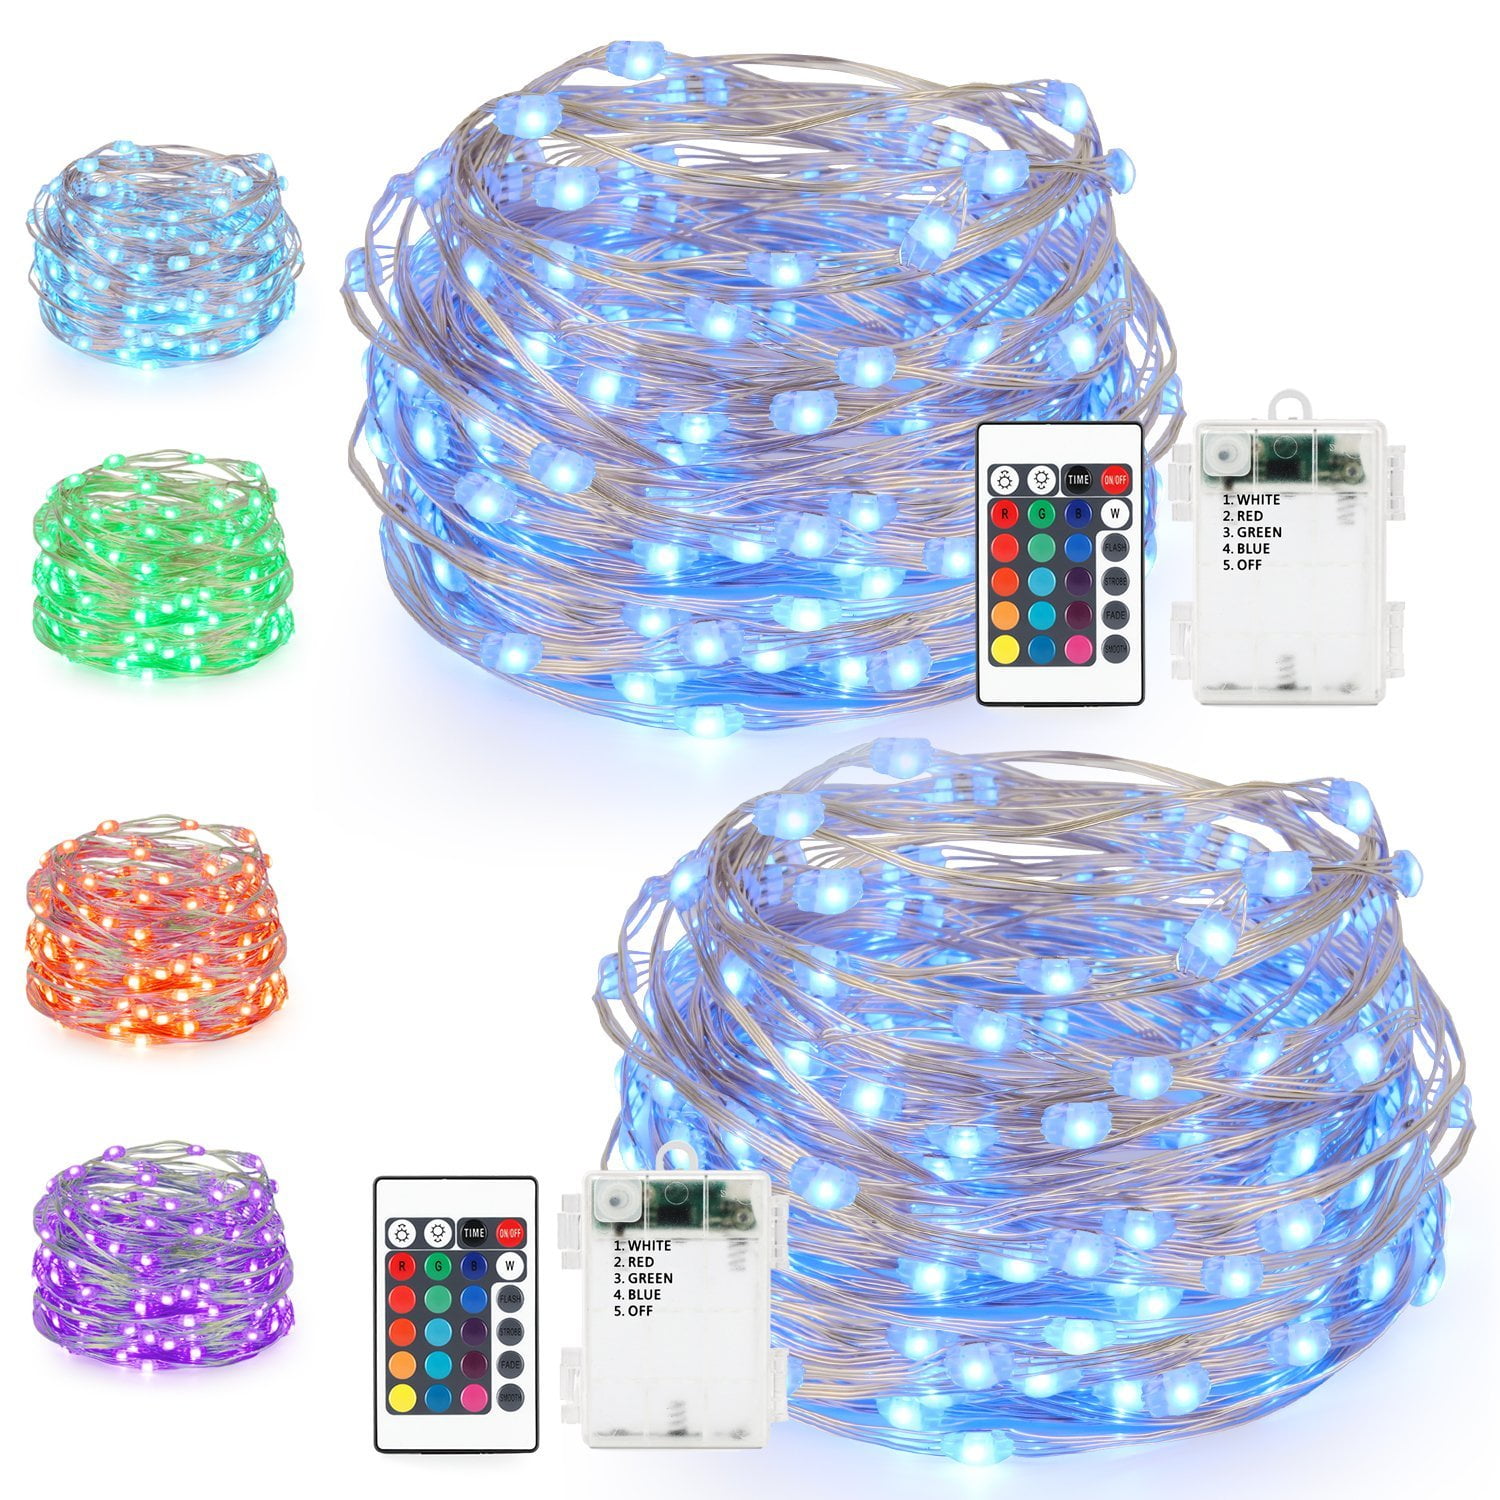 Superior Mart Fairy String Lights Battery Operated 16.4 Ft with Controller 50 LEDs Copper Wire Firefly Christmas Decor Decporation Bothwinner - Blue Light 